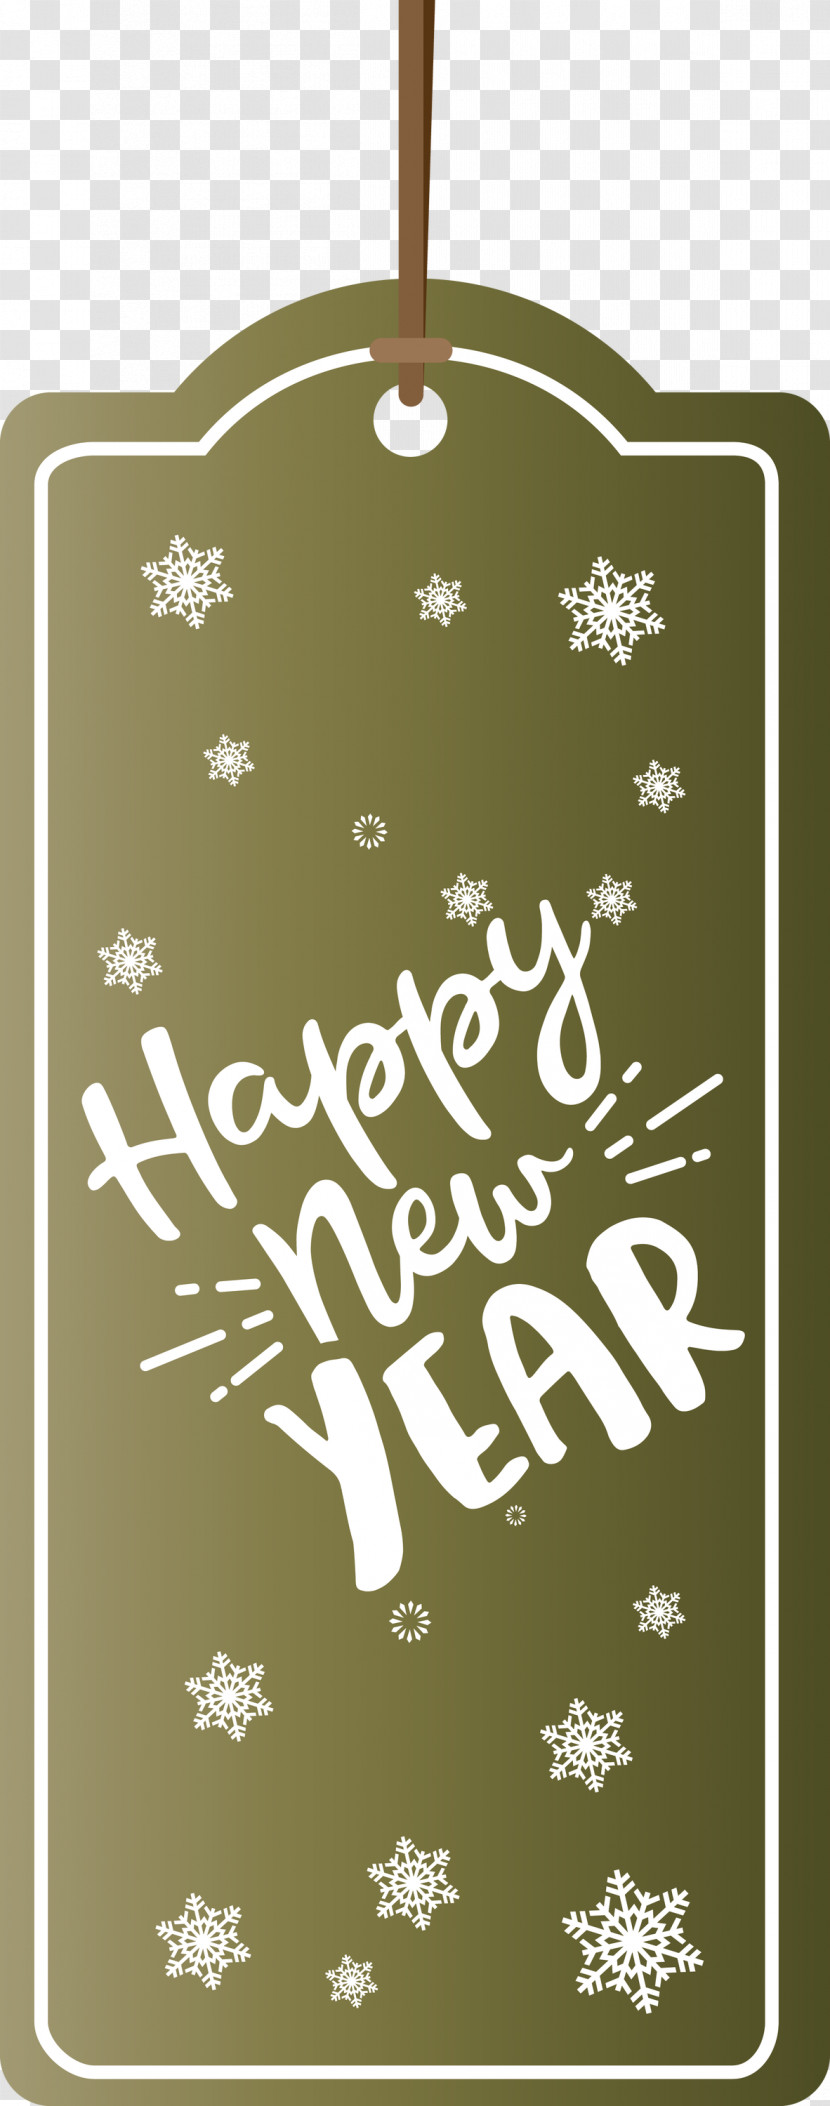 2021 Happy New Year New Year Transparent PNG